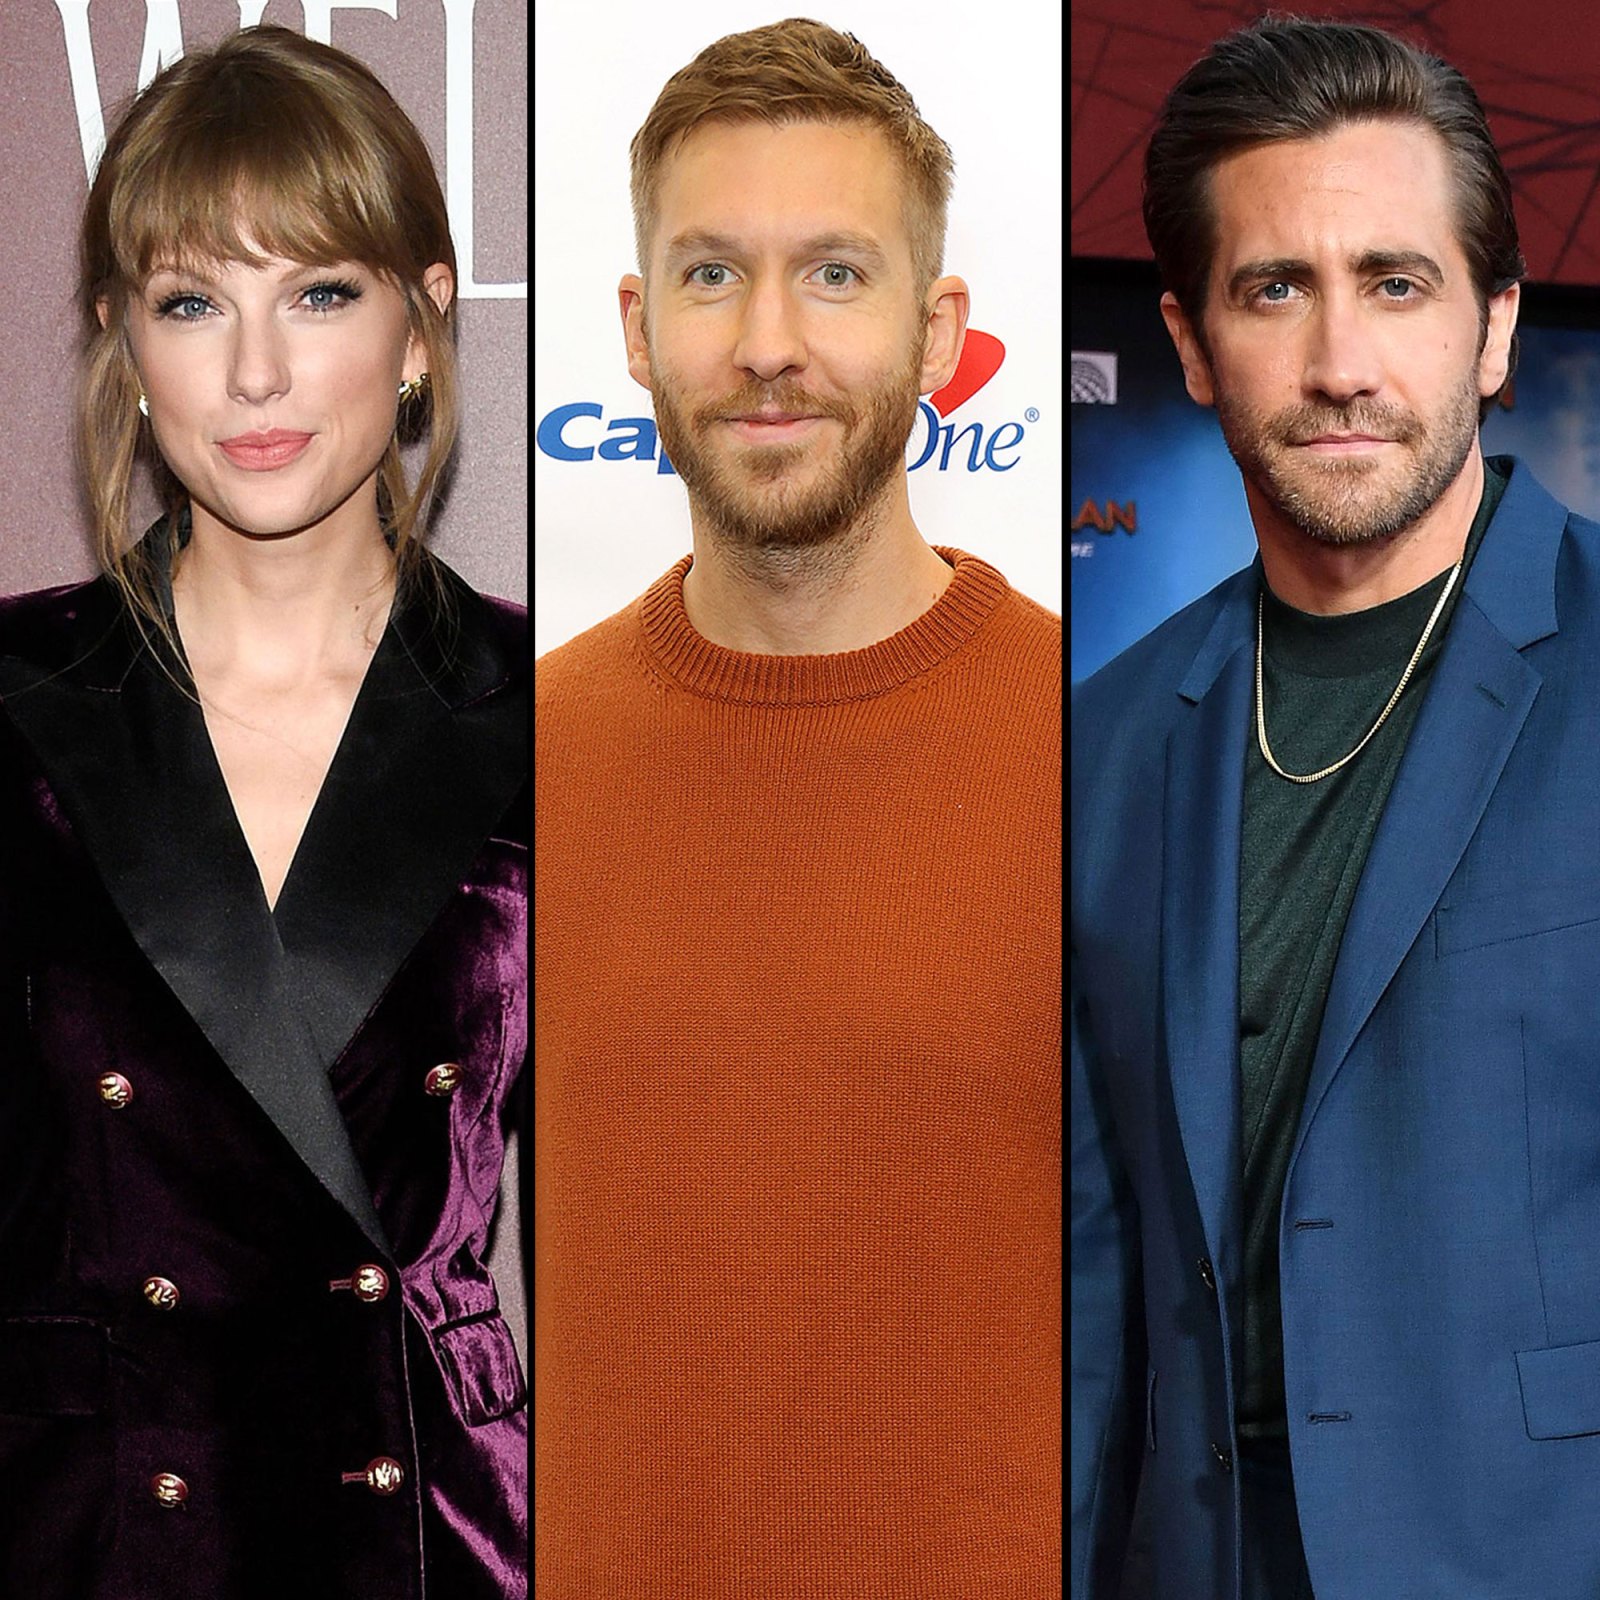 Taylor Swift And Her Exes Where Do They Stand Now